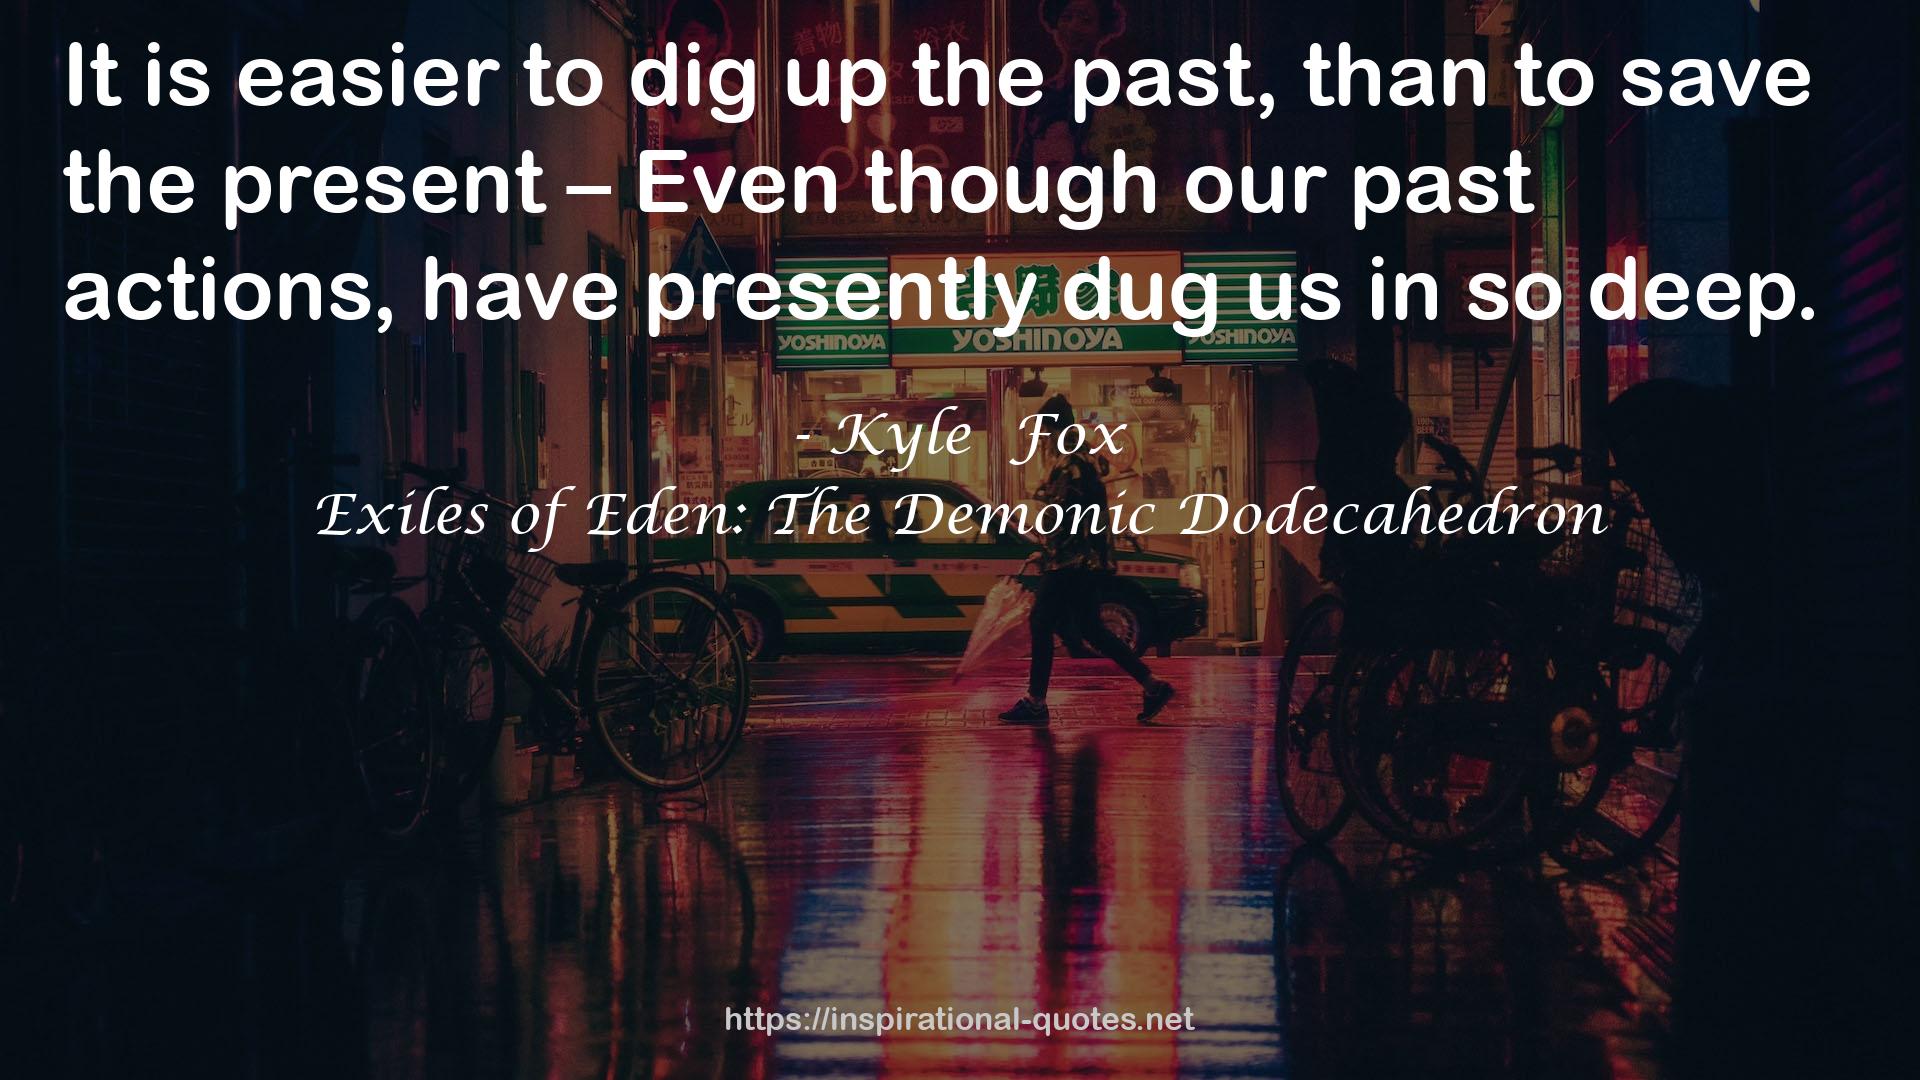 Exiles of Eden: The Demonic Dodecahedron QUOTES